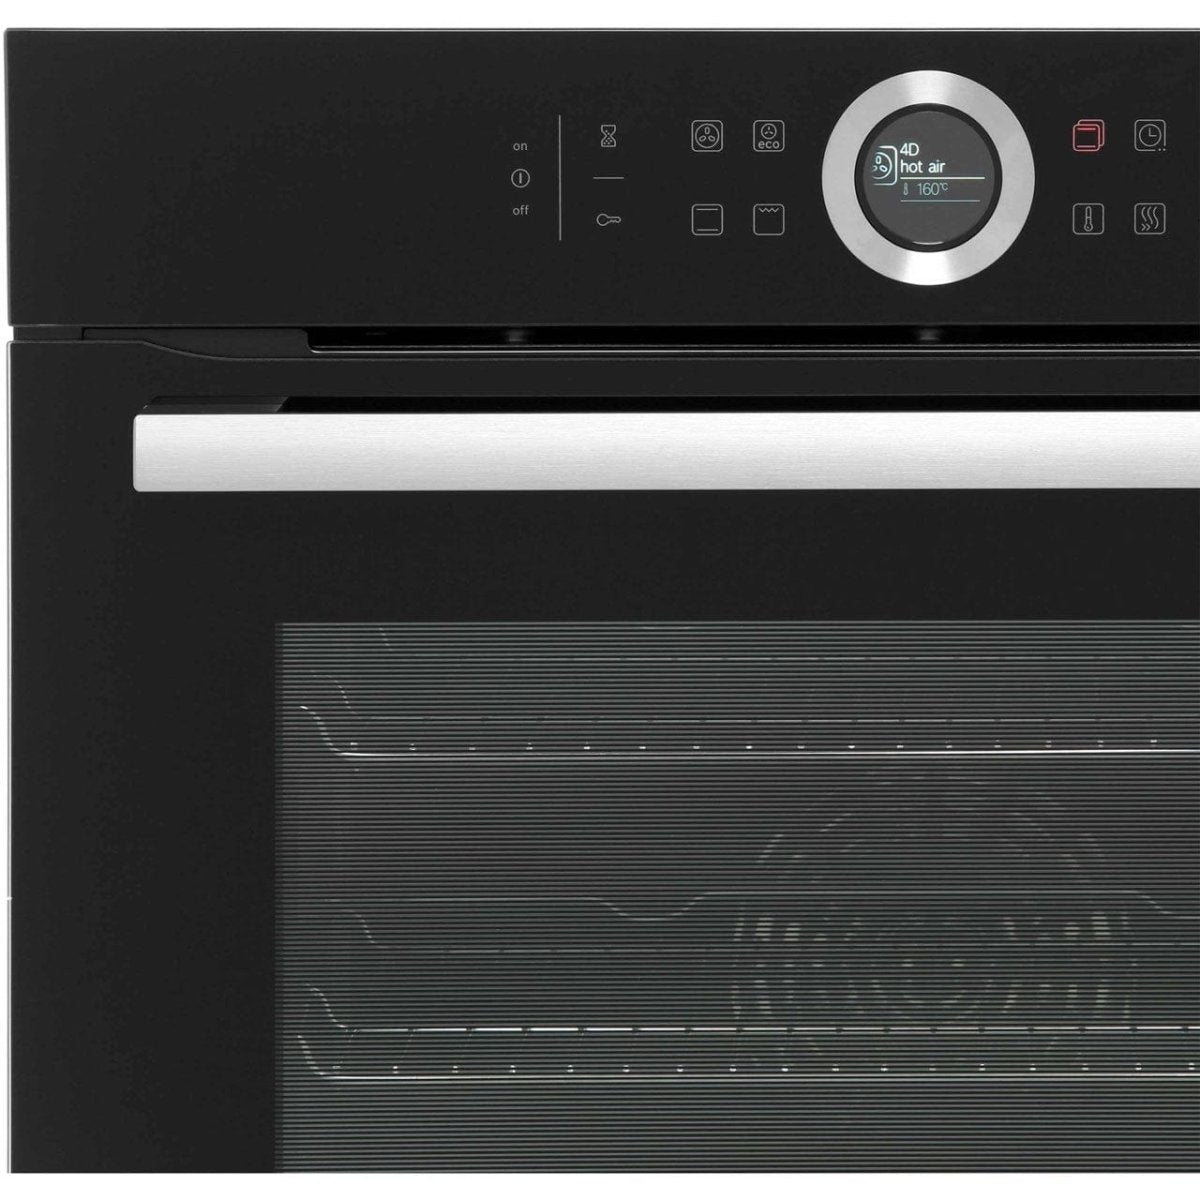 Bosch Serie 8 HBG634BS1B Built In Electric Single Oven - Stainless Steel - A+ Rated - Atlantic Electrics